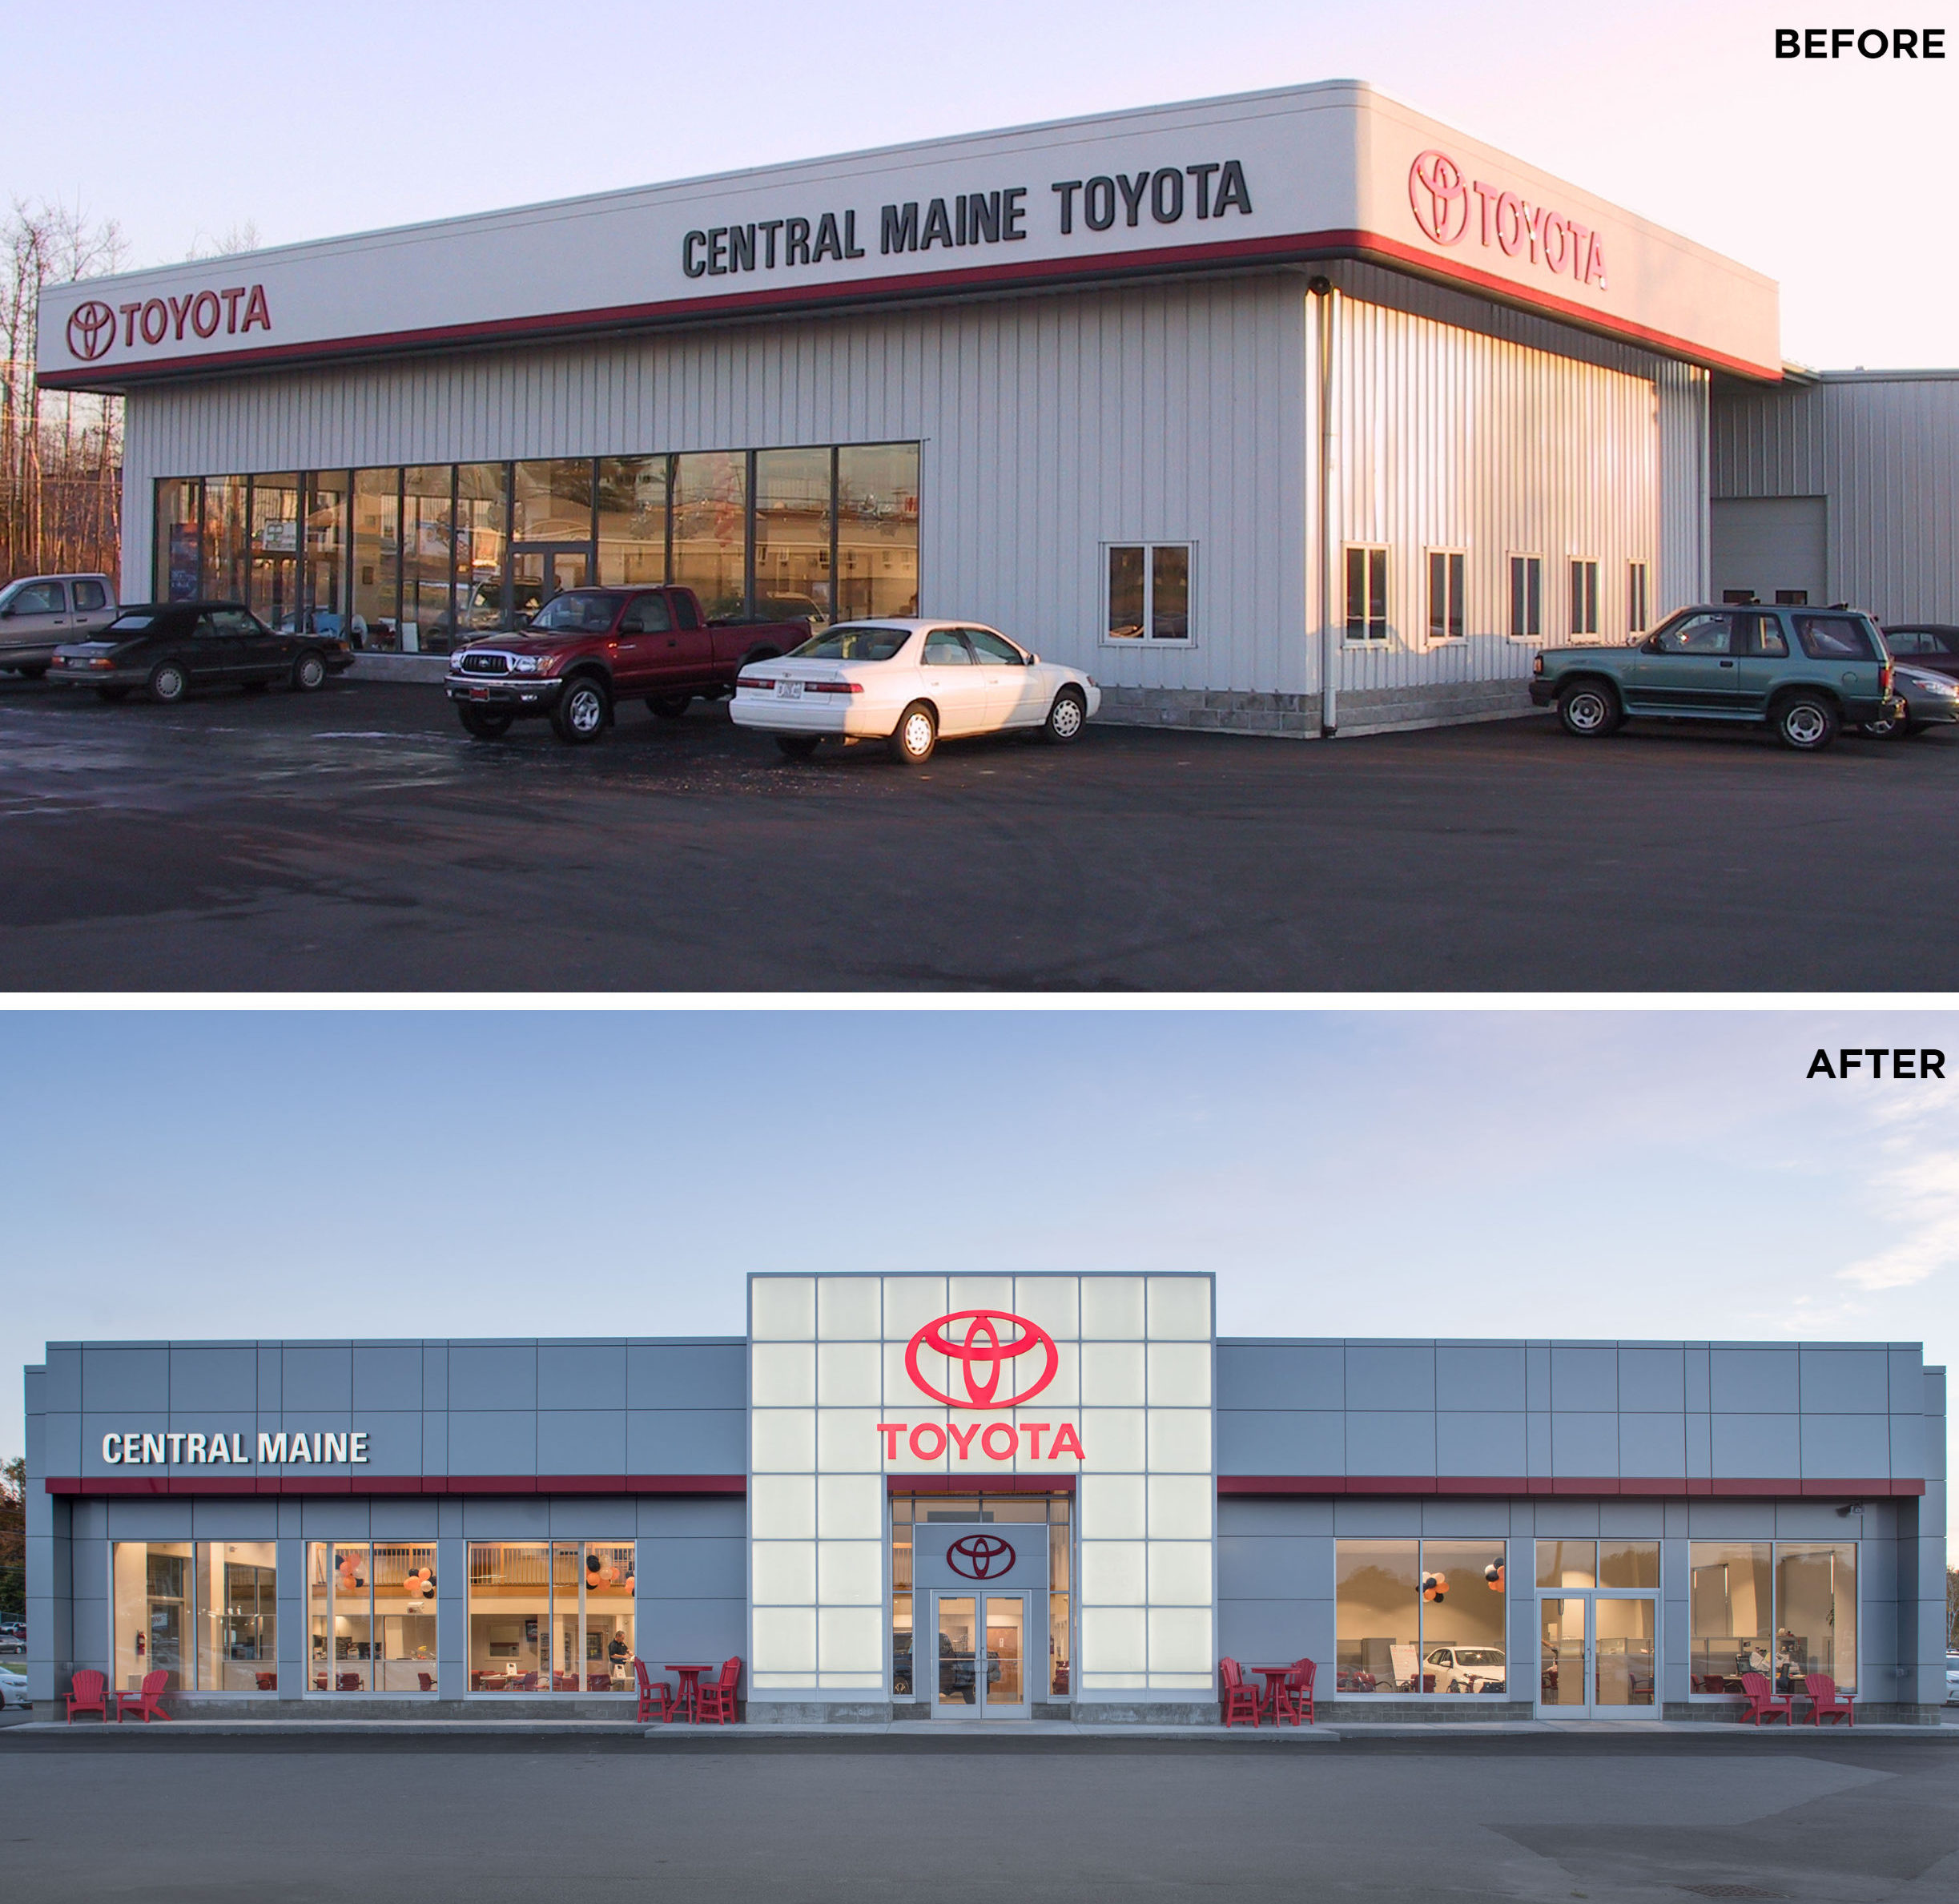 Before and after comparison of retrofitted car dealership